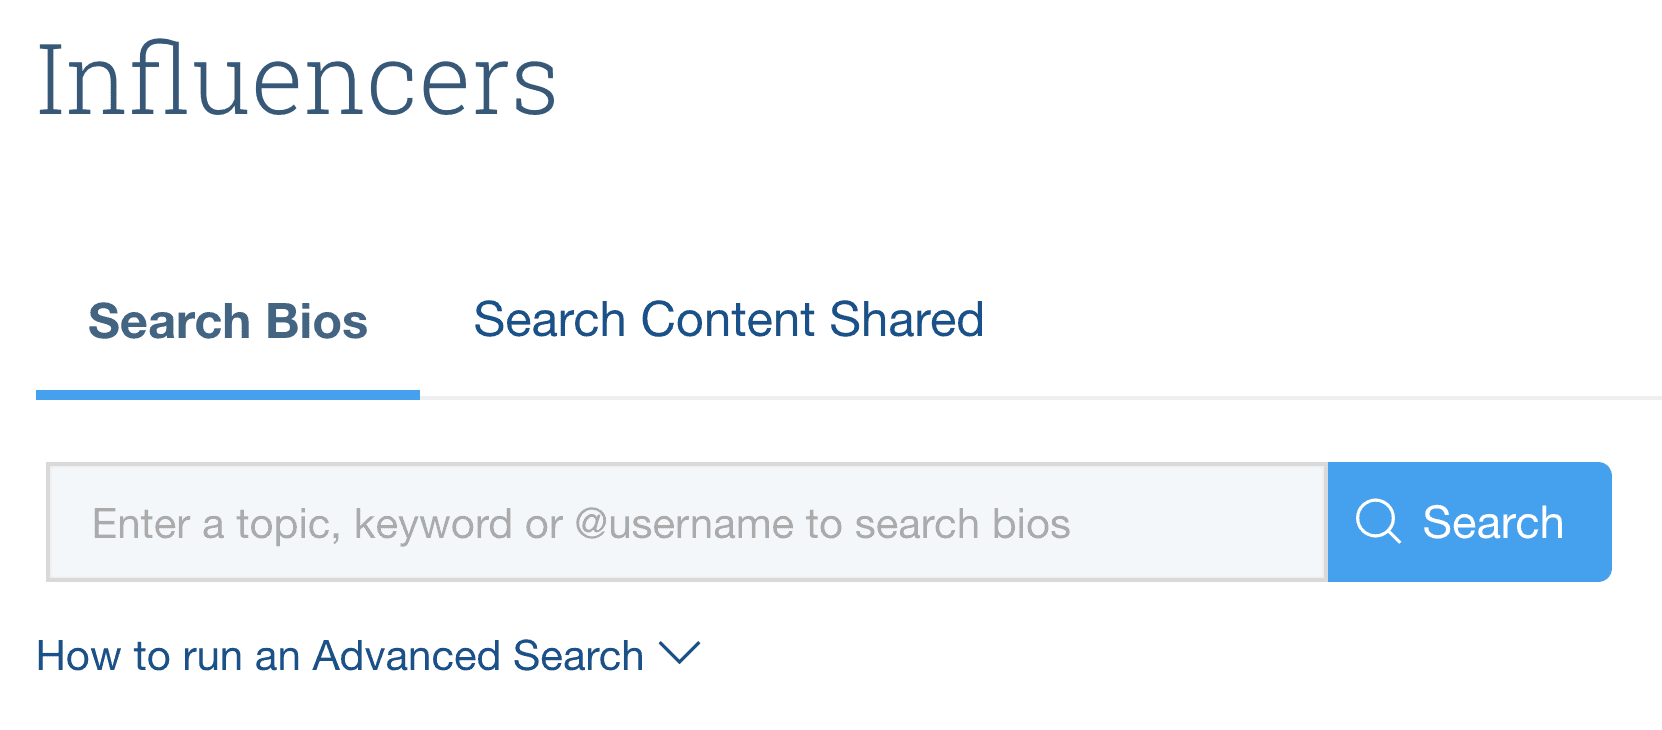 BuzzSumo influencer research tool